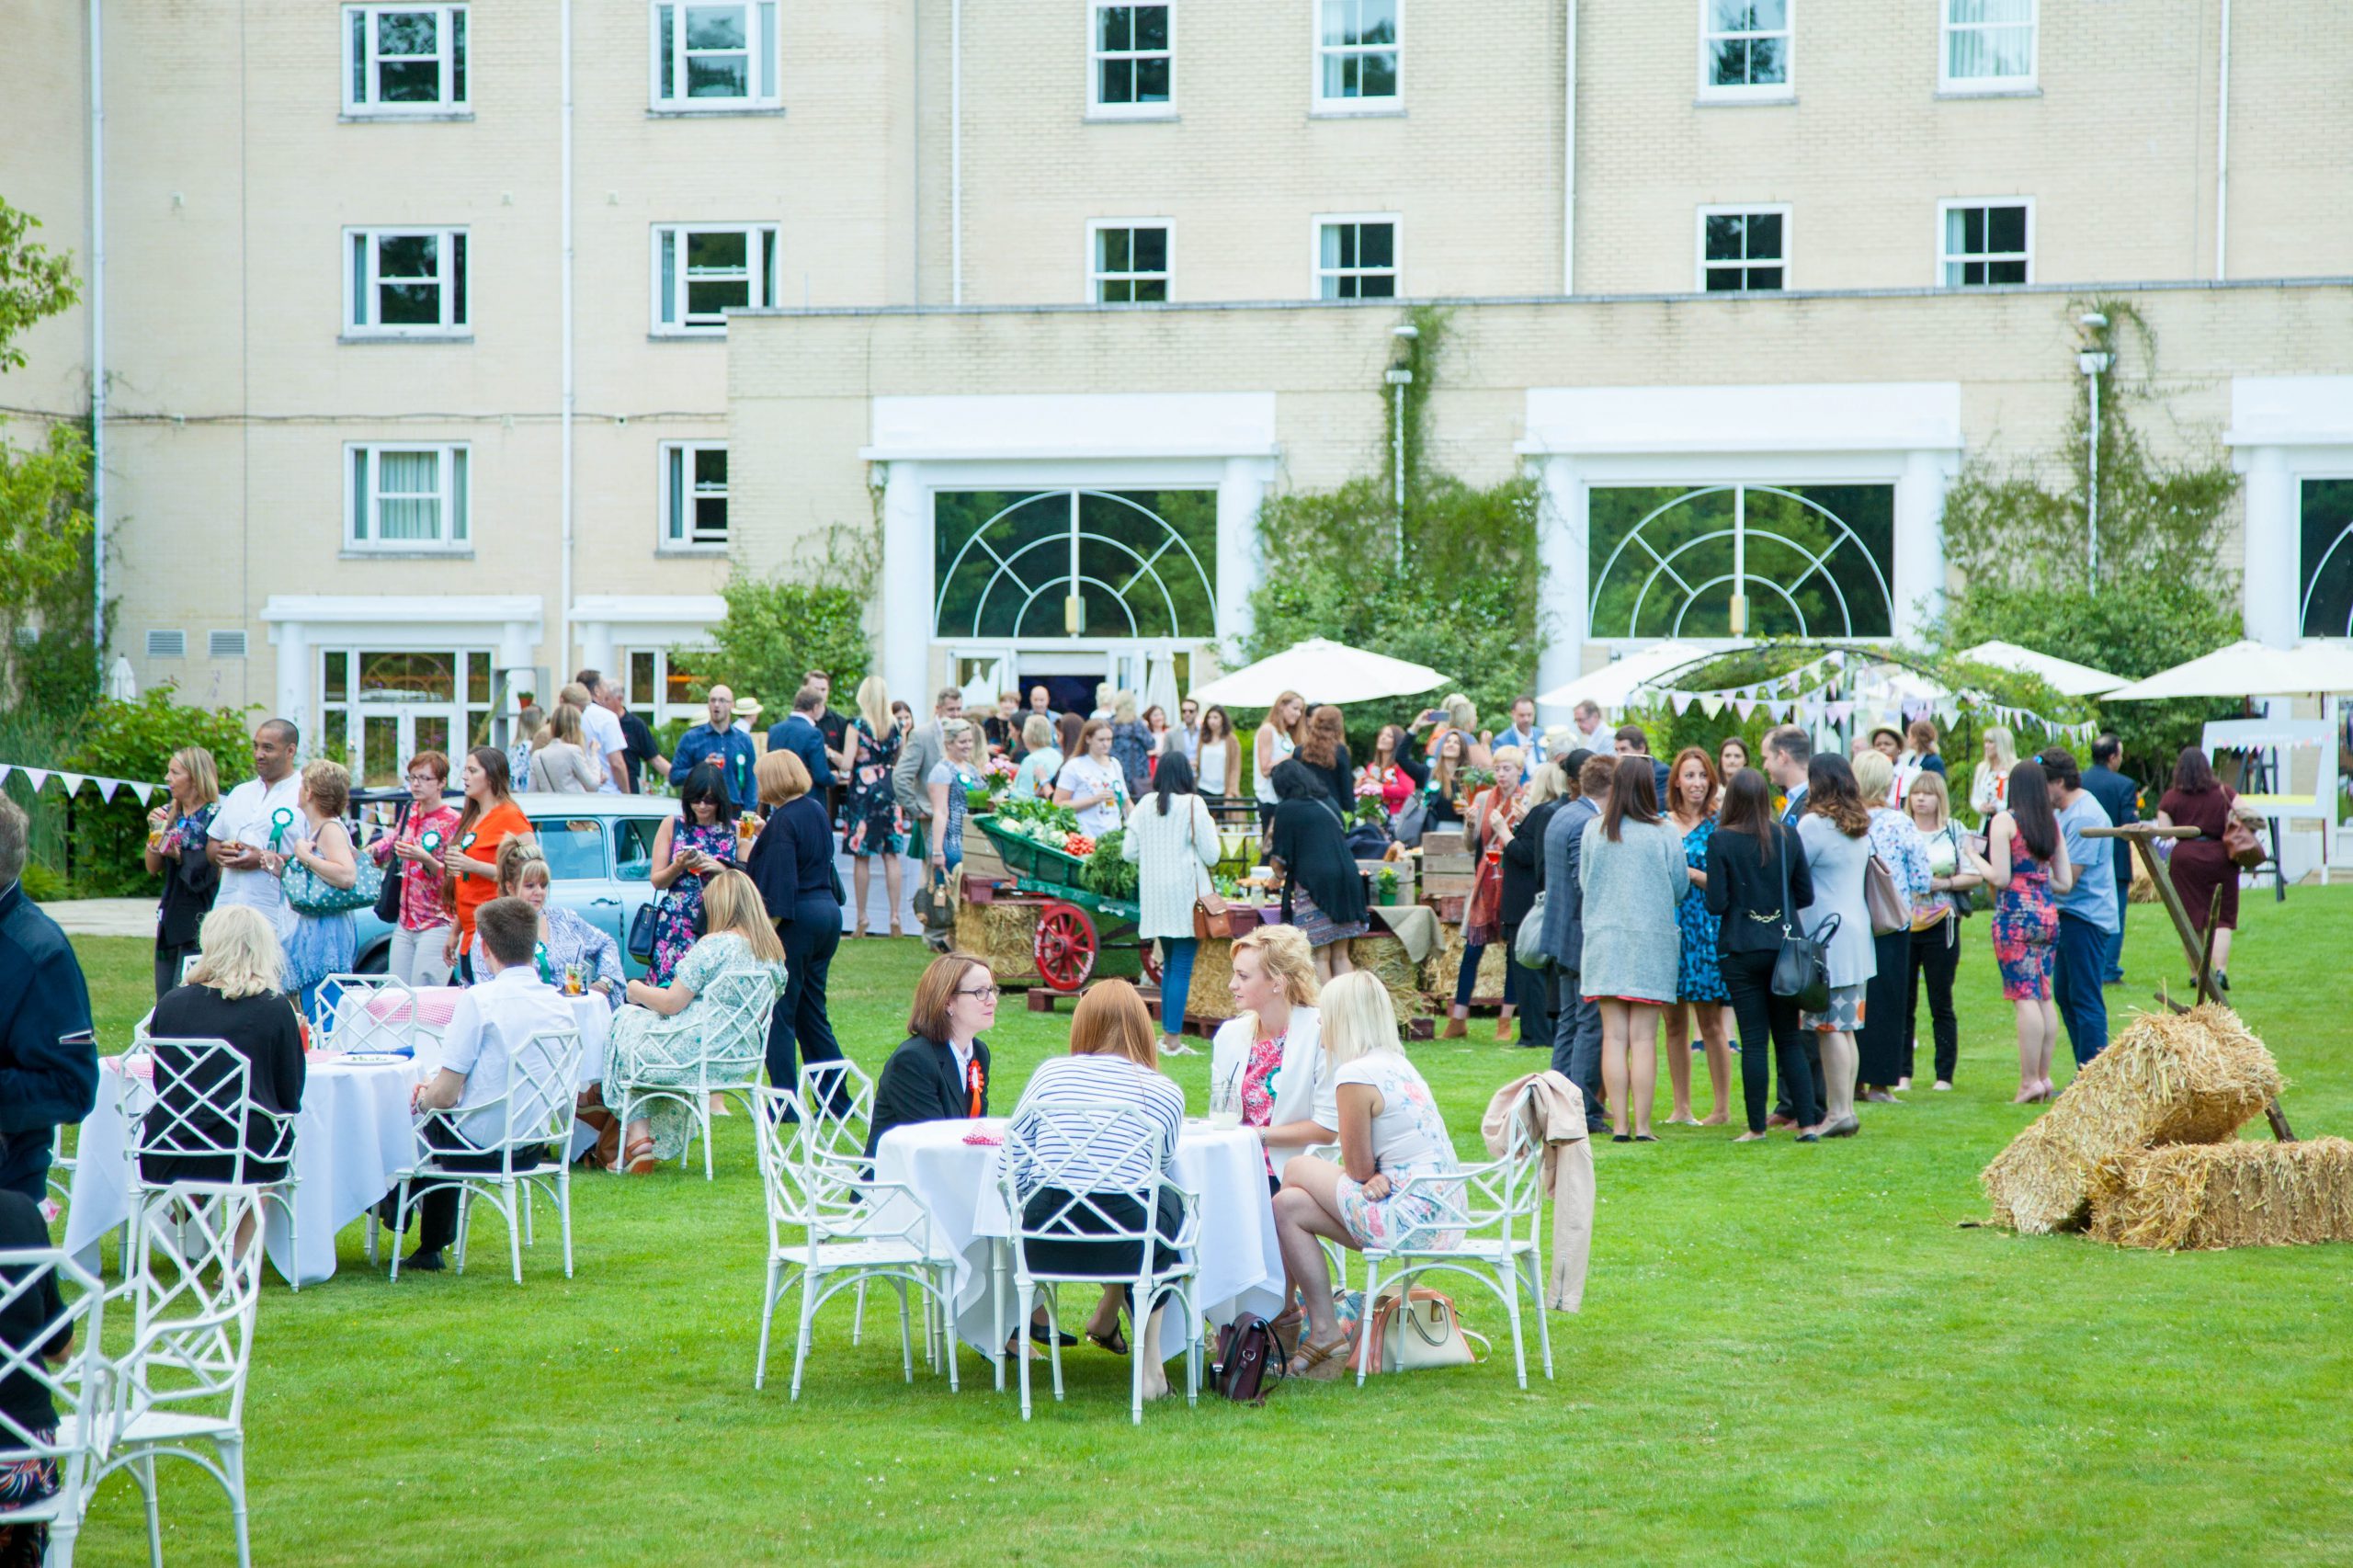 AB Hotels Celebrate at their Annual Summer Garden Party 2017